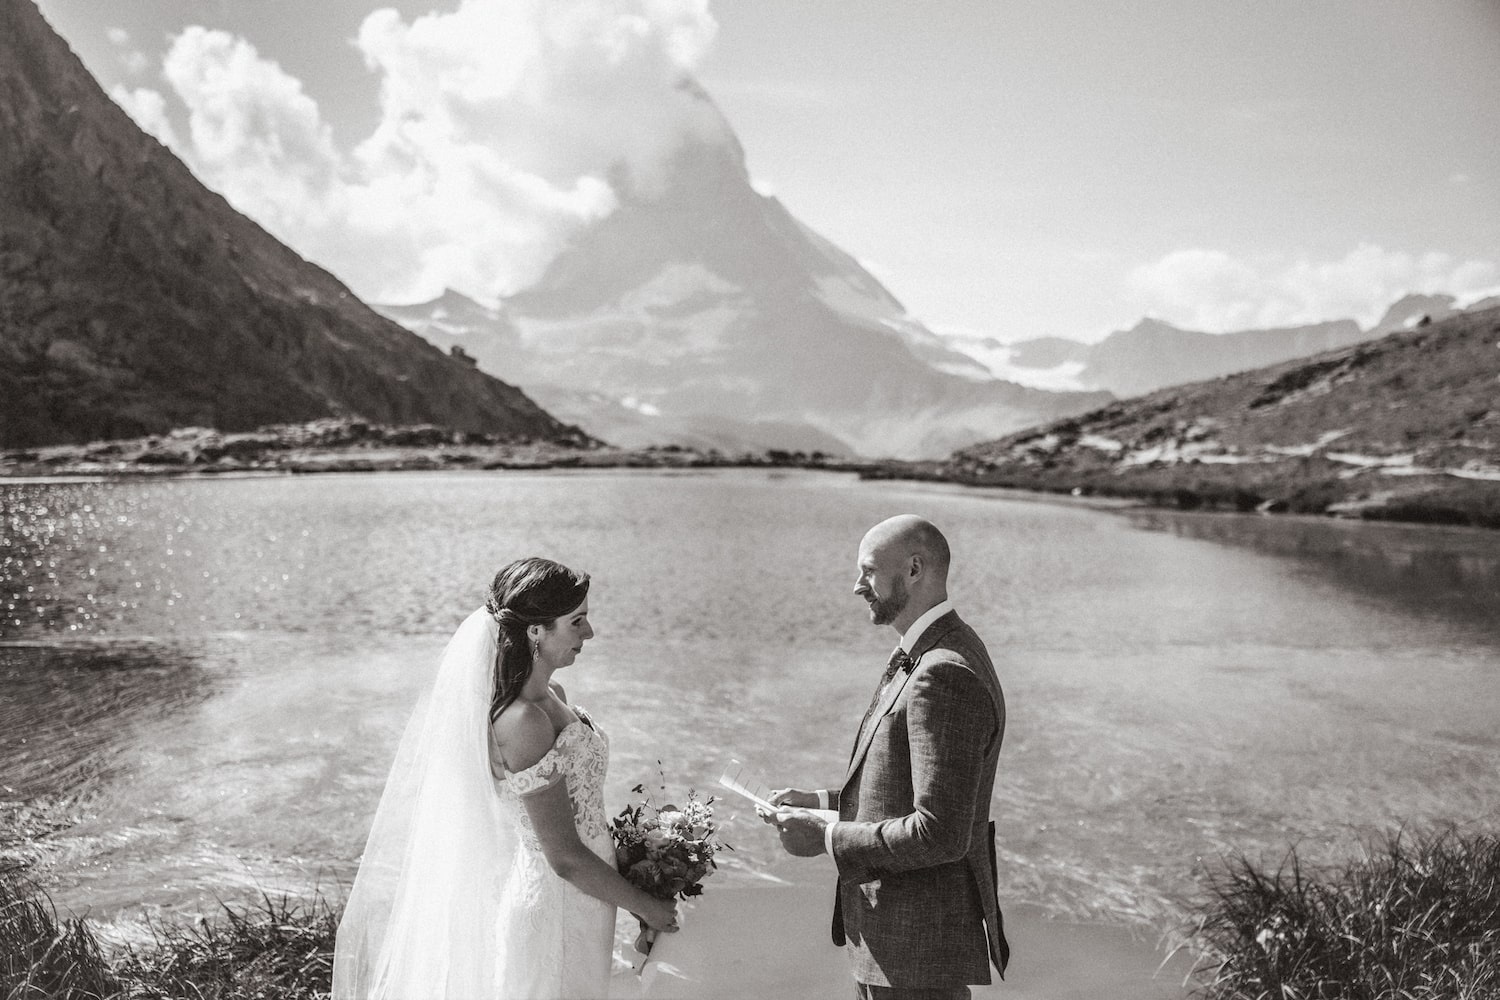 an intimate wedding ceremony in front of the matterhorn